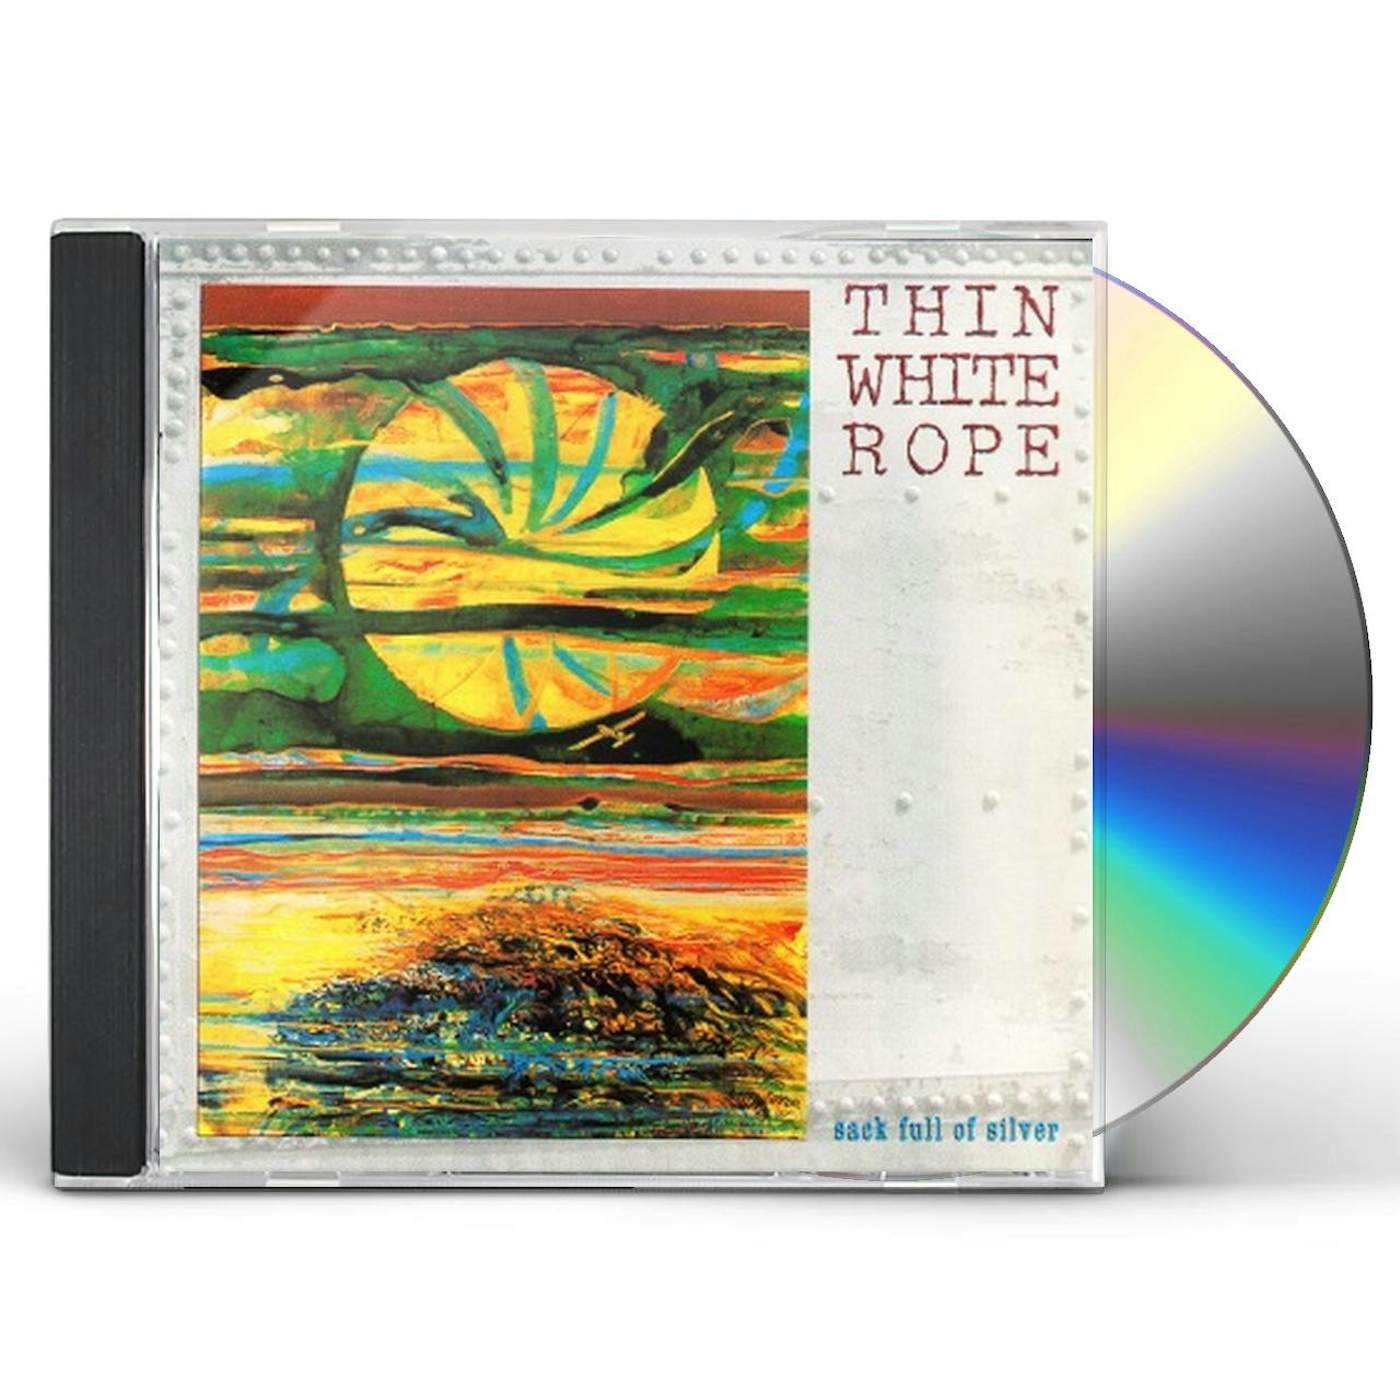 Thin White Rope SACK FULL OF SILVER CD